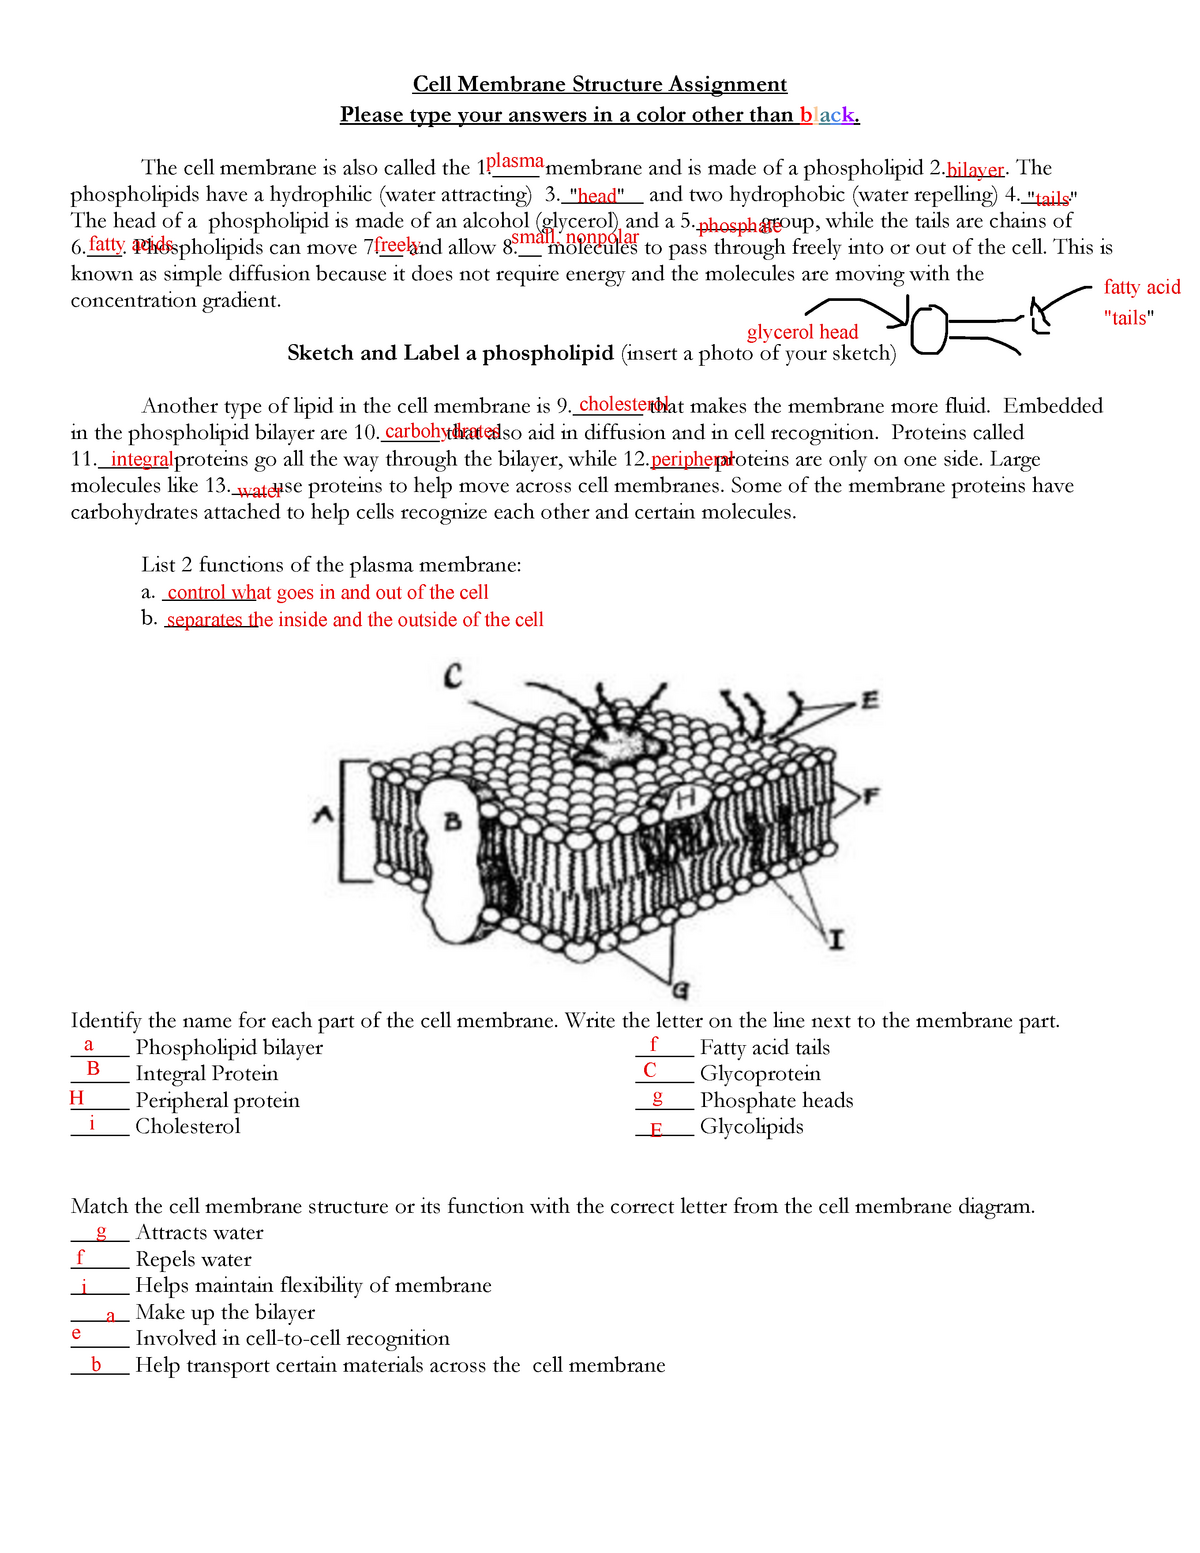 Unit 20 - Cell Membrane Assignment (Hn Bio - Falcone 20) - BIO20 Inside Cell Membrane Coloring Worksheet